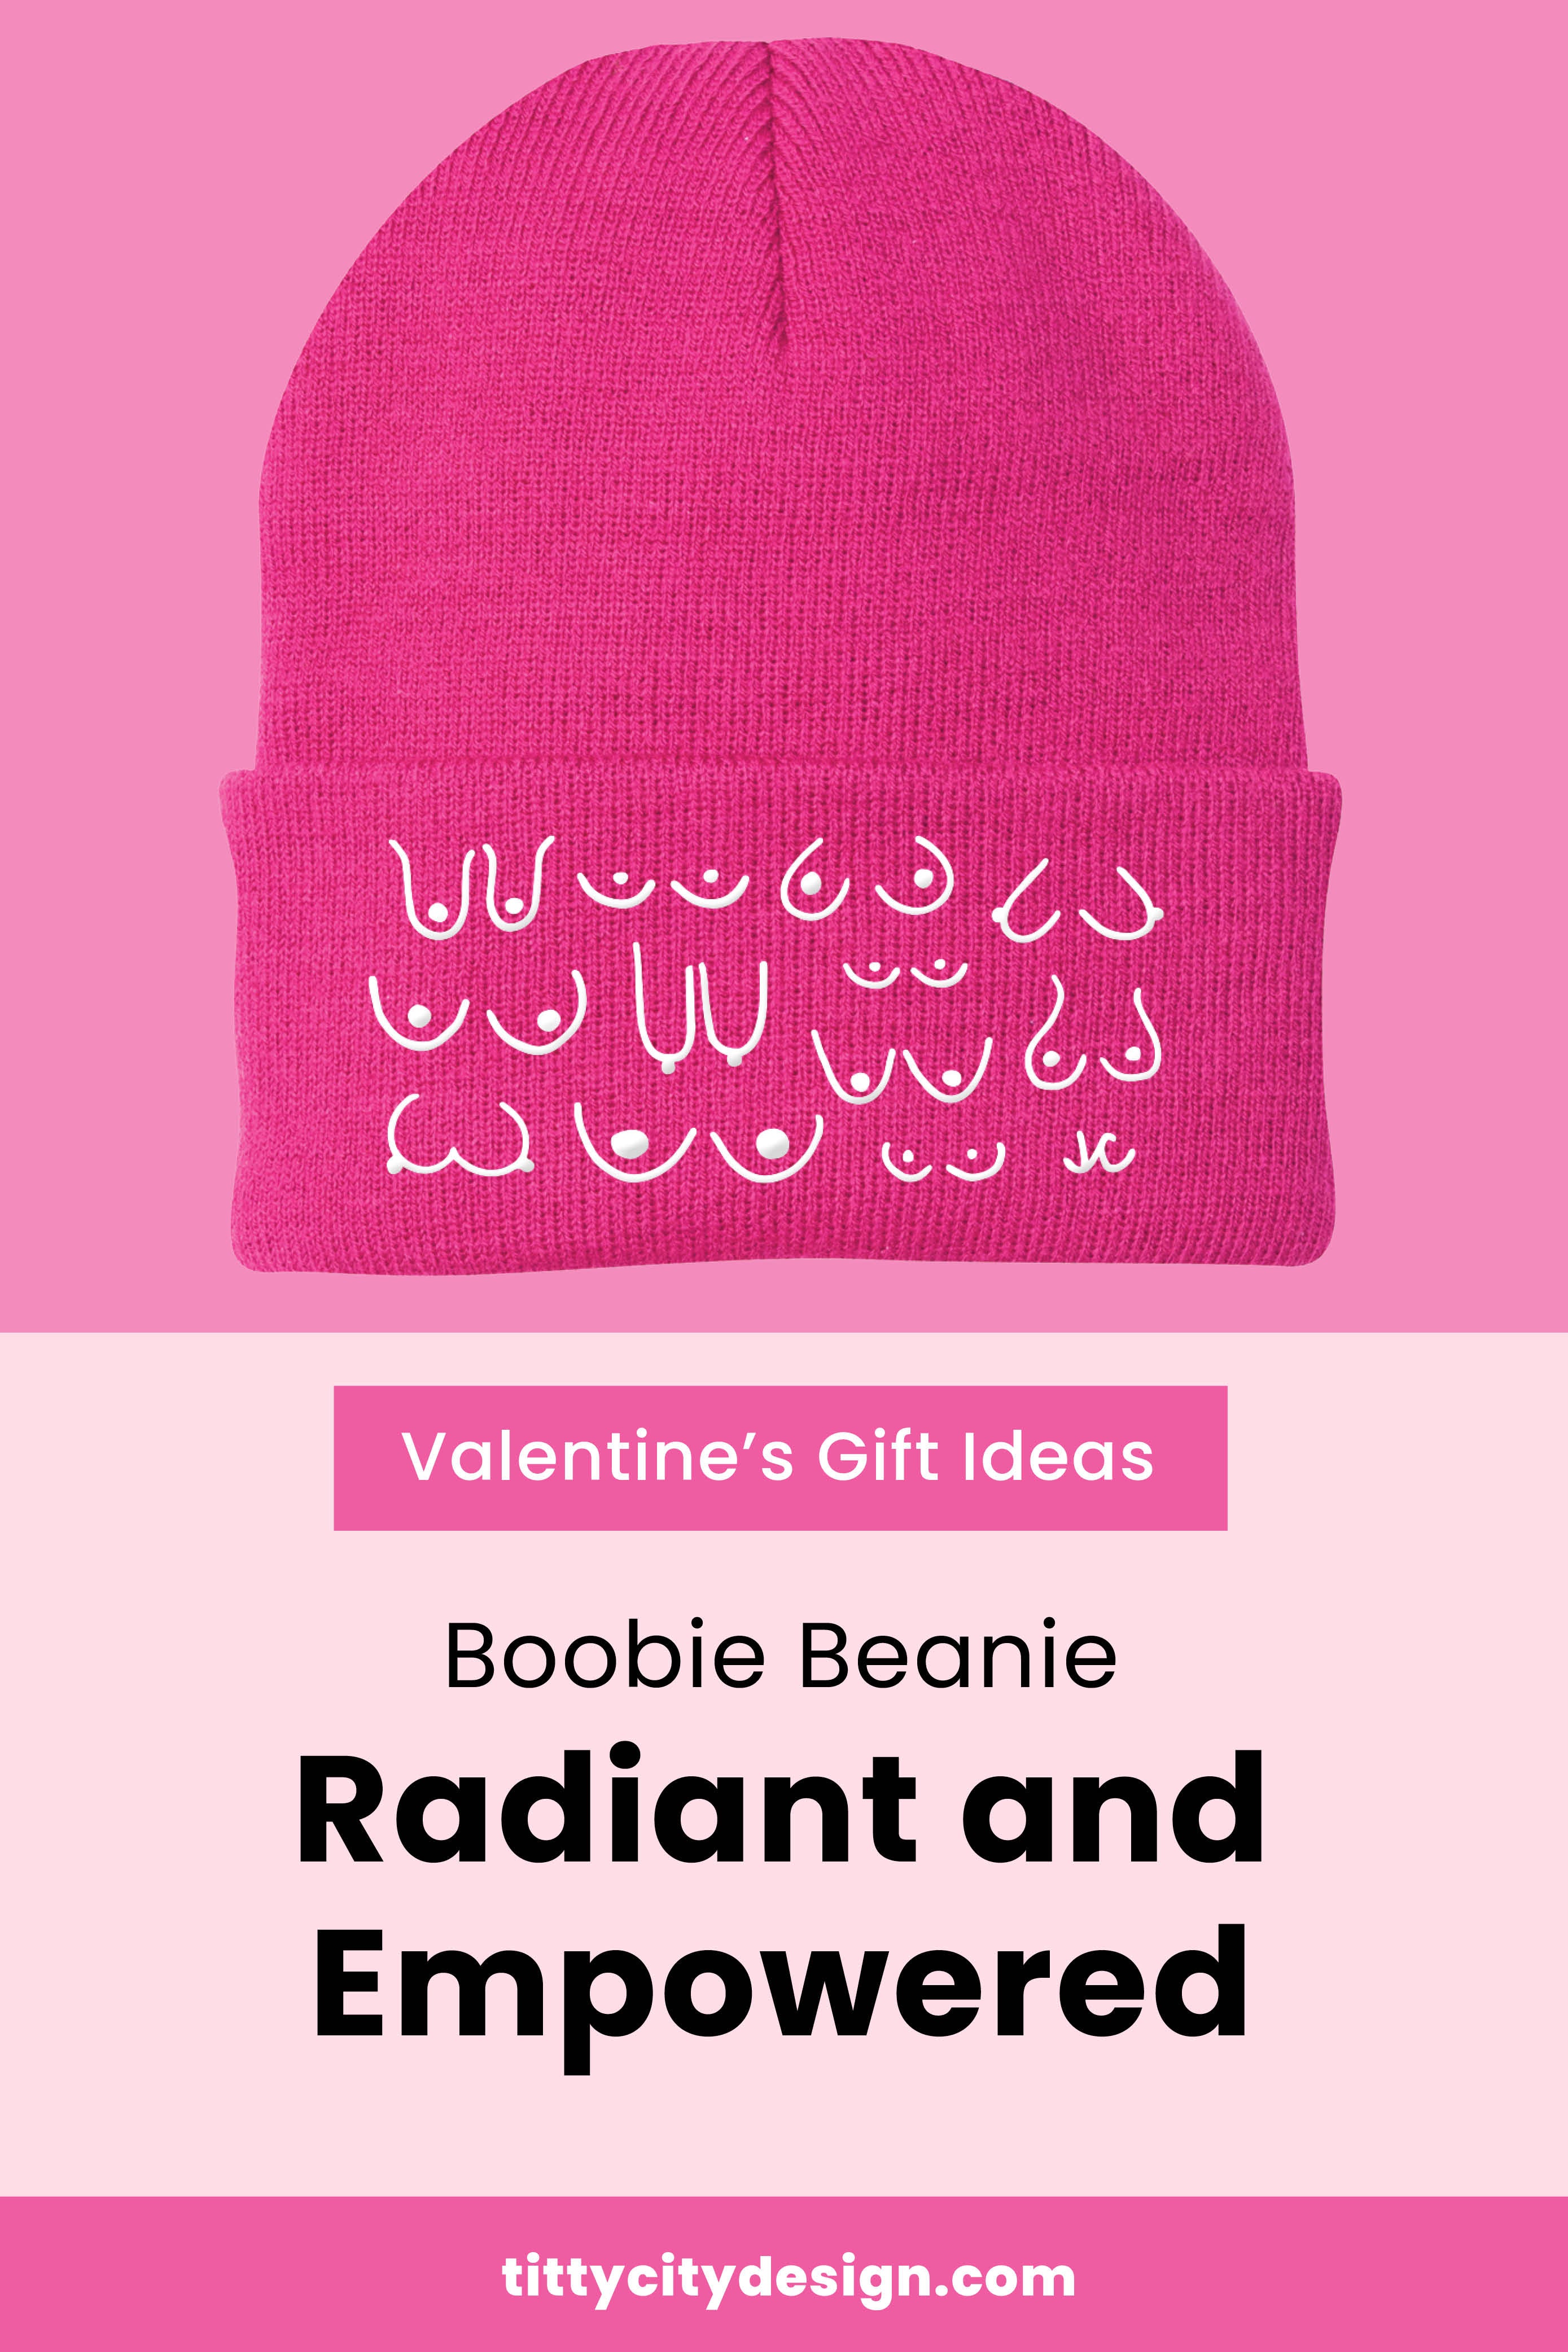 Valentines Gift Ideas - Hot Pink Knit Booby Beanie Hat "Radiant and Empowered"